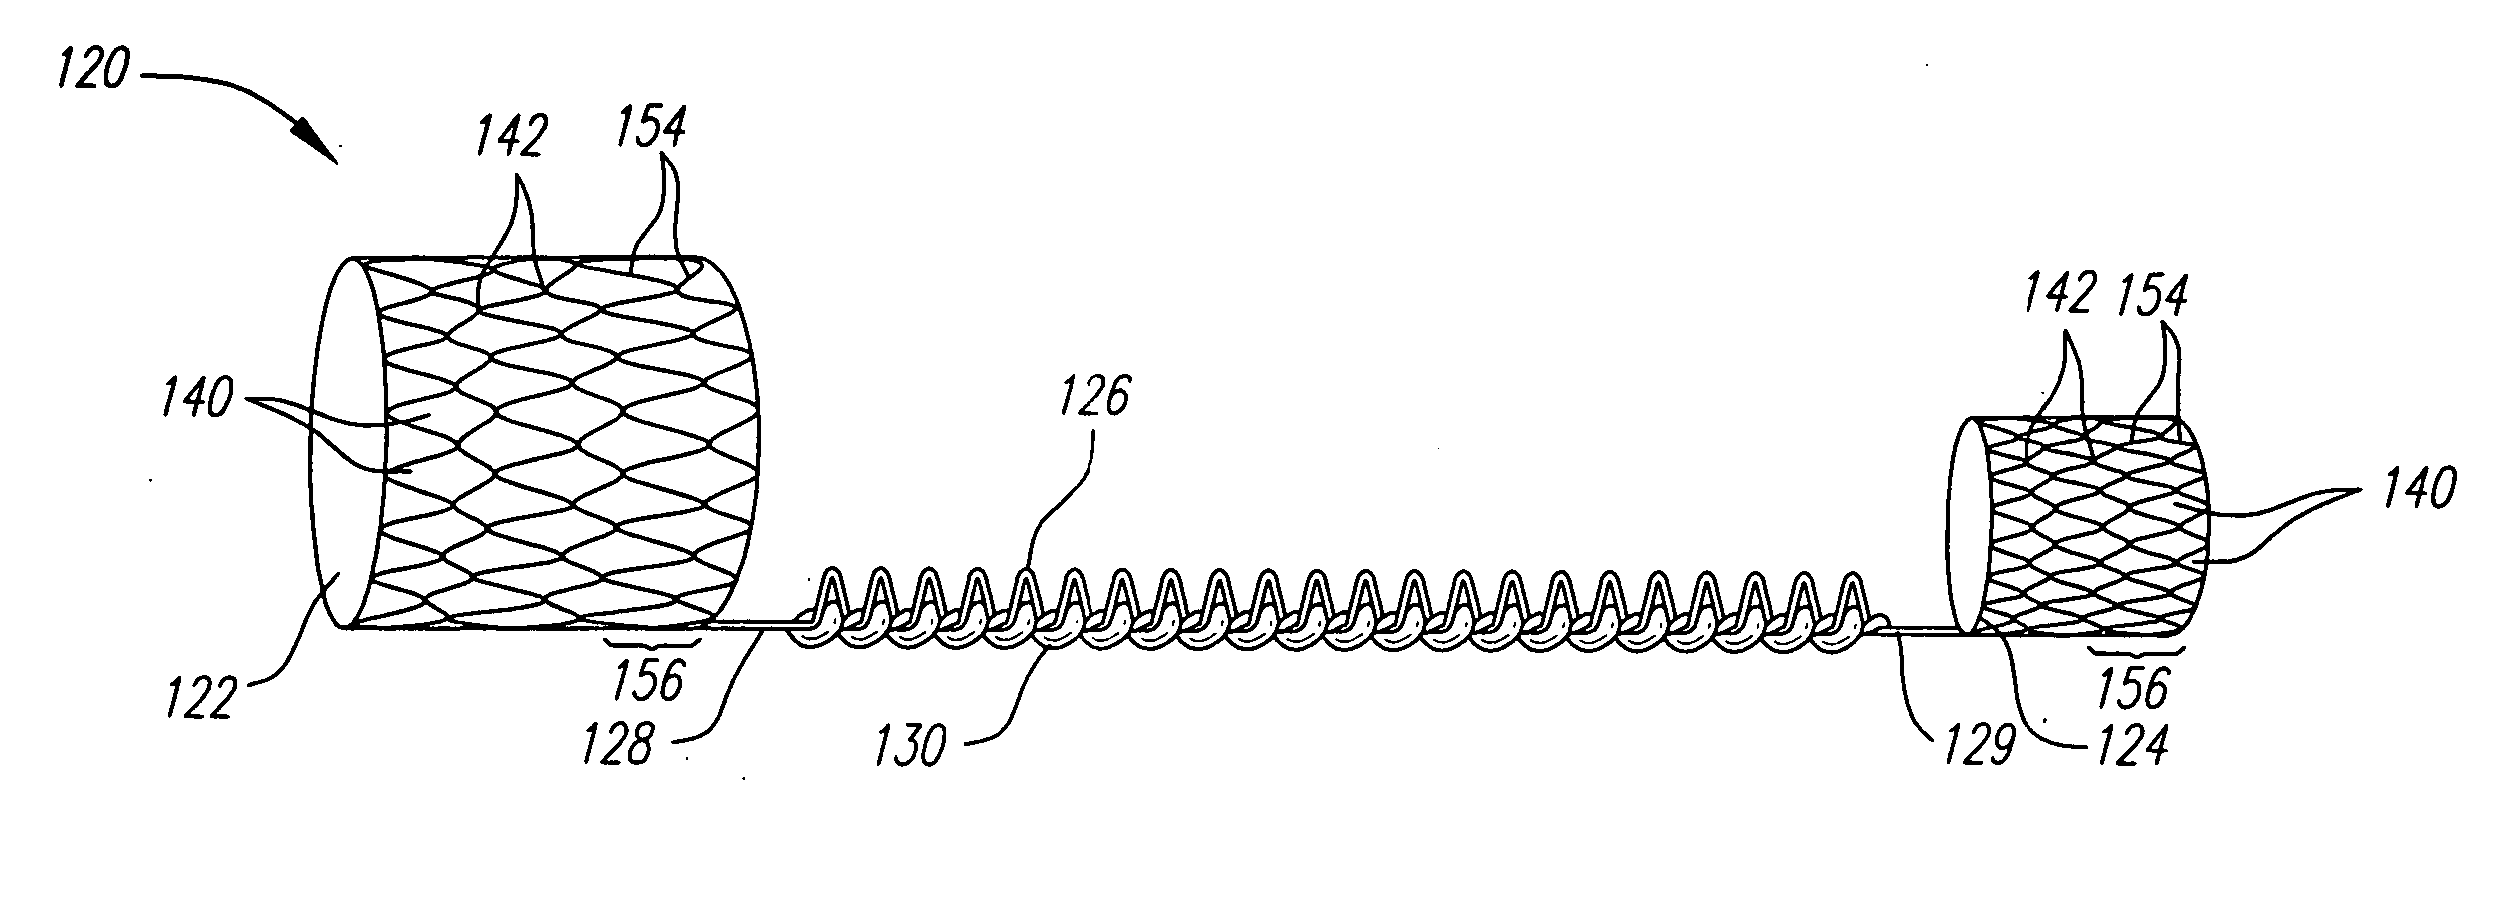 System and method for delivering a mitral valve repair device